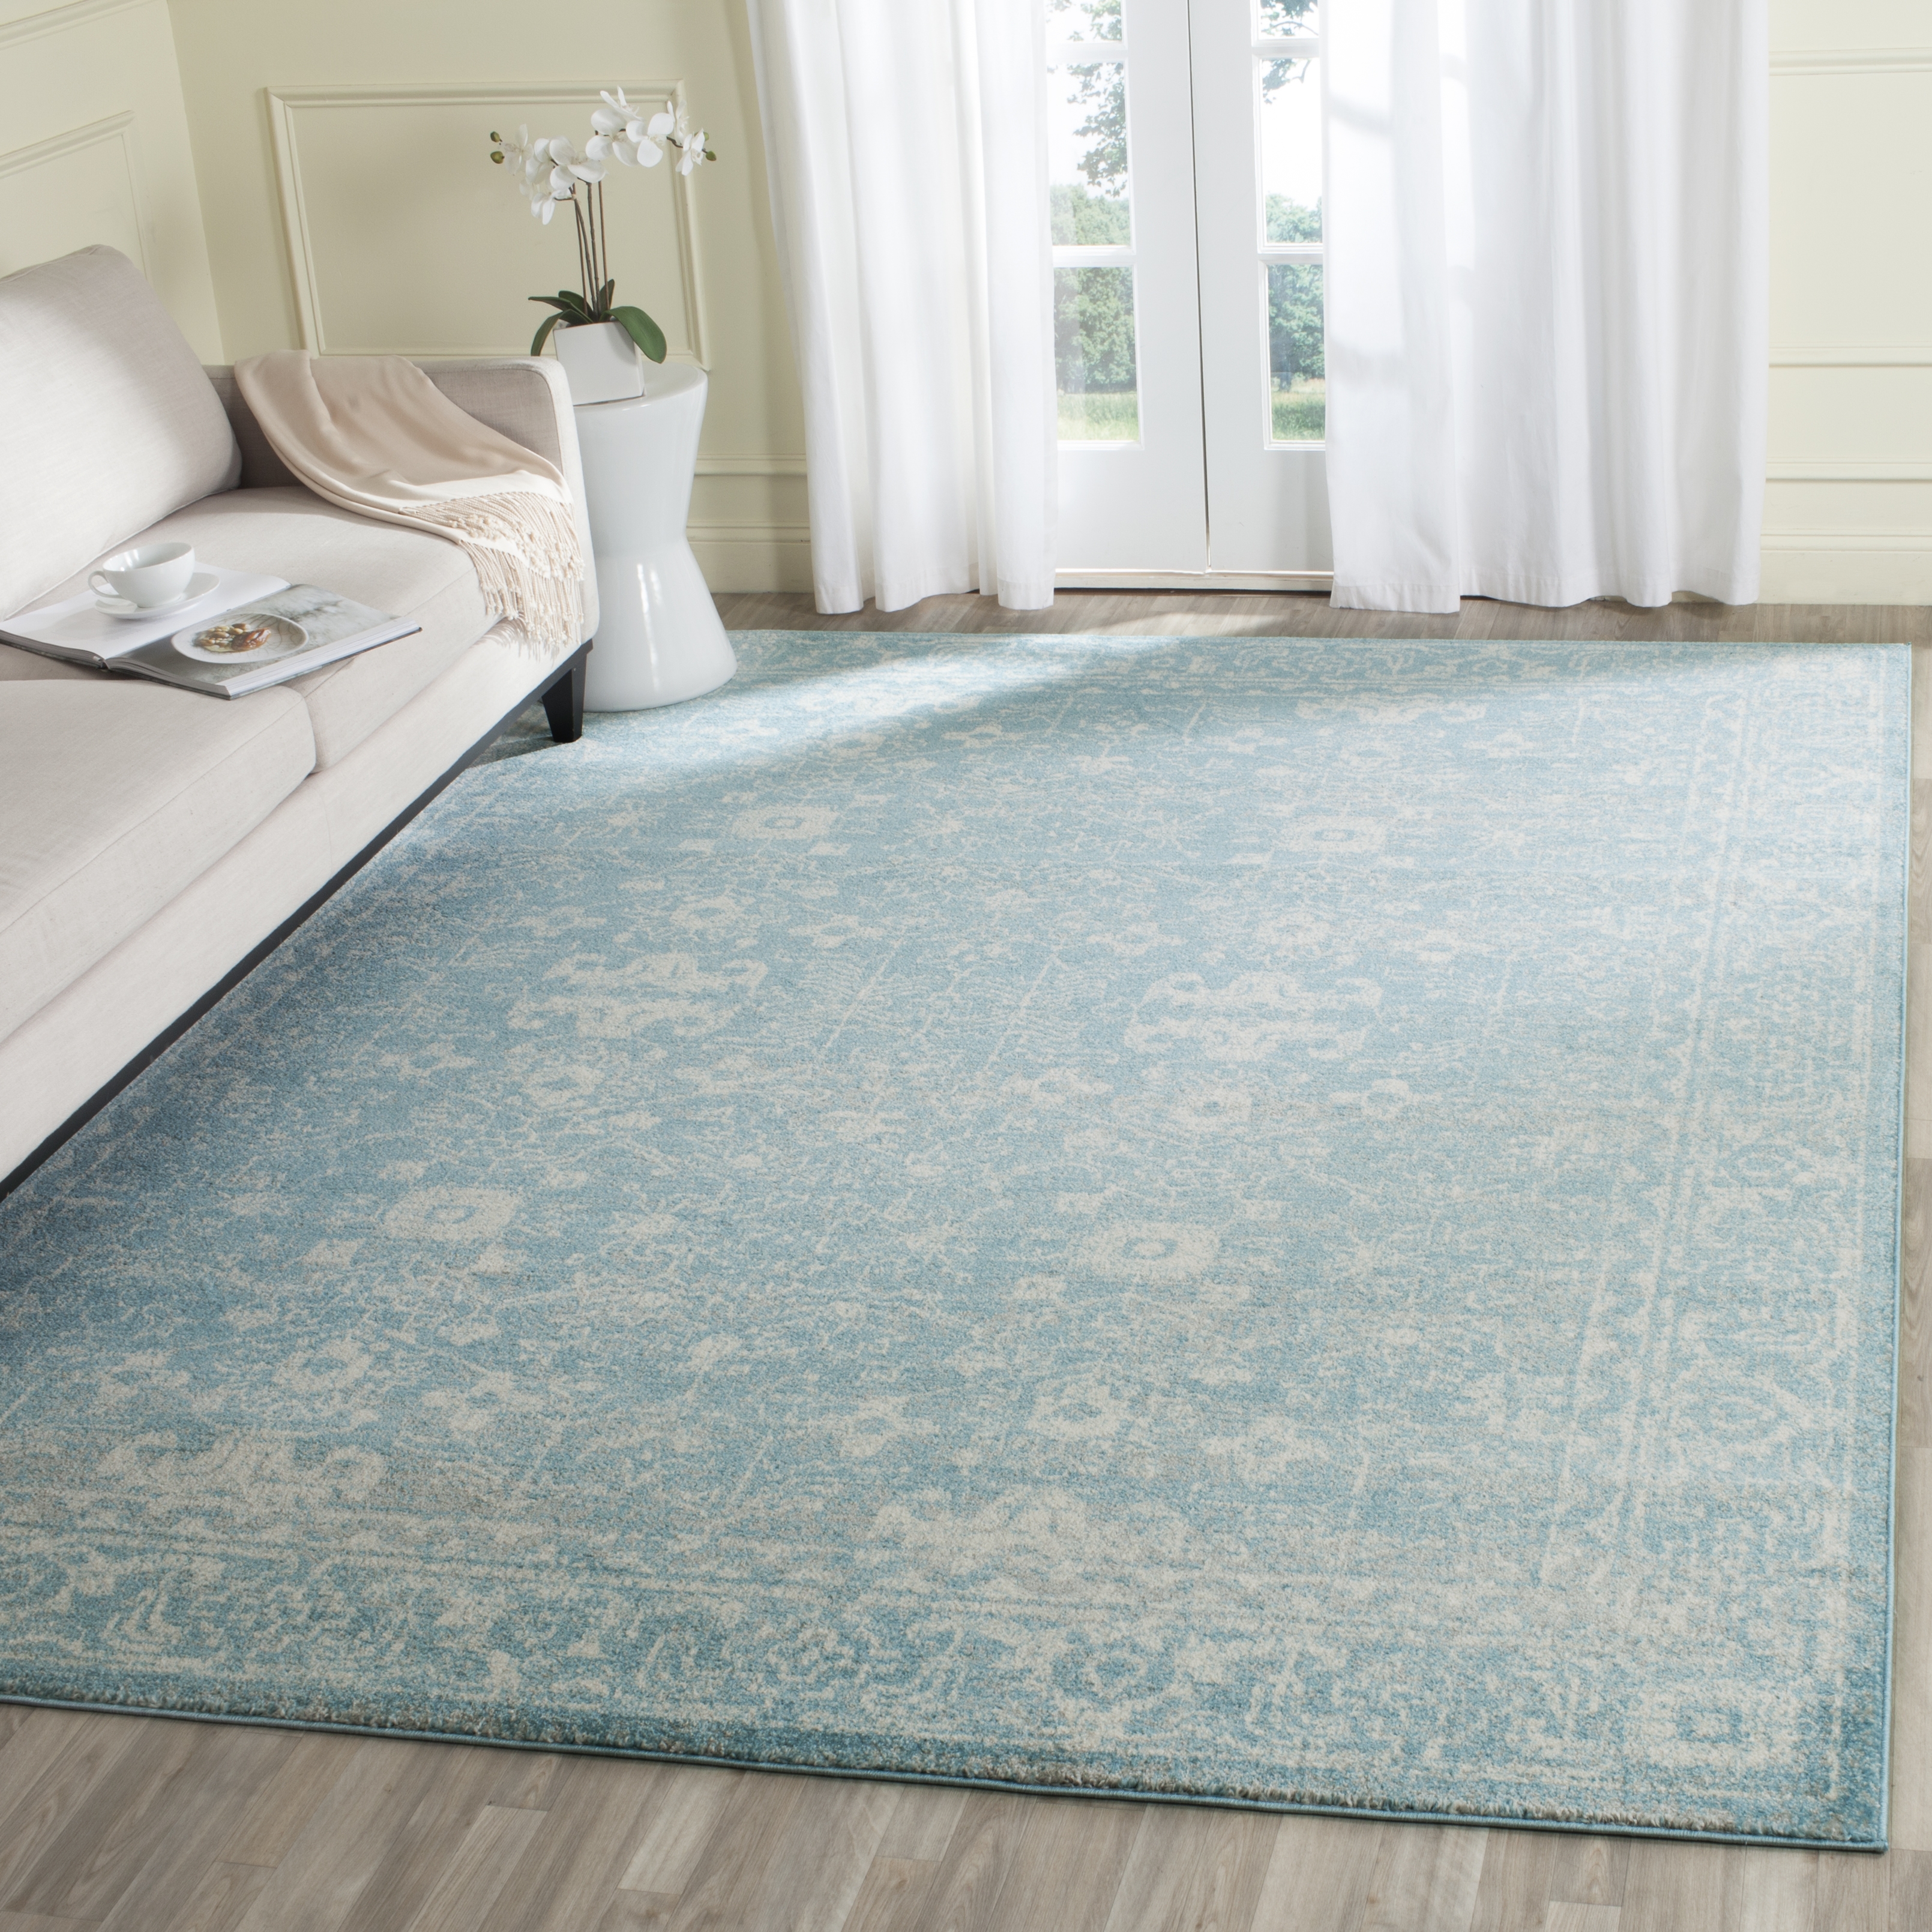 Arlo Home Woven Area Rug, EVK270D, Light Blue/Ivory,  10' X 14' - Image 1